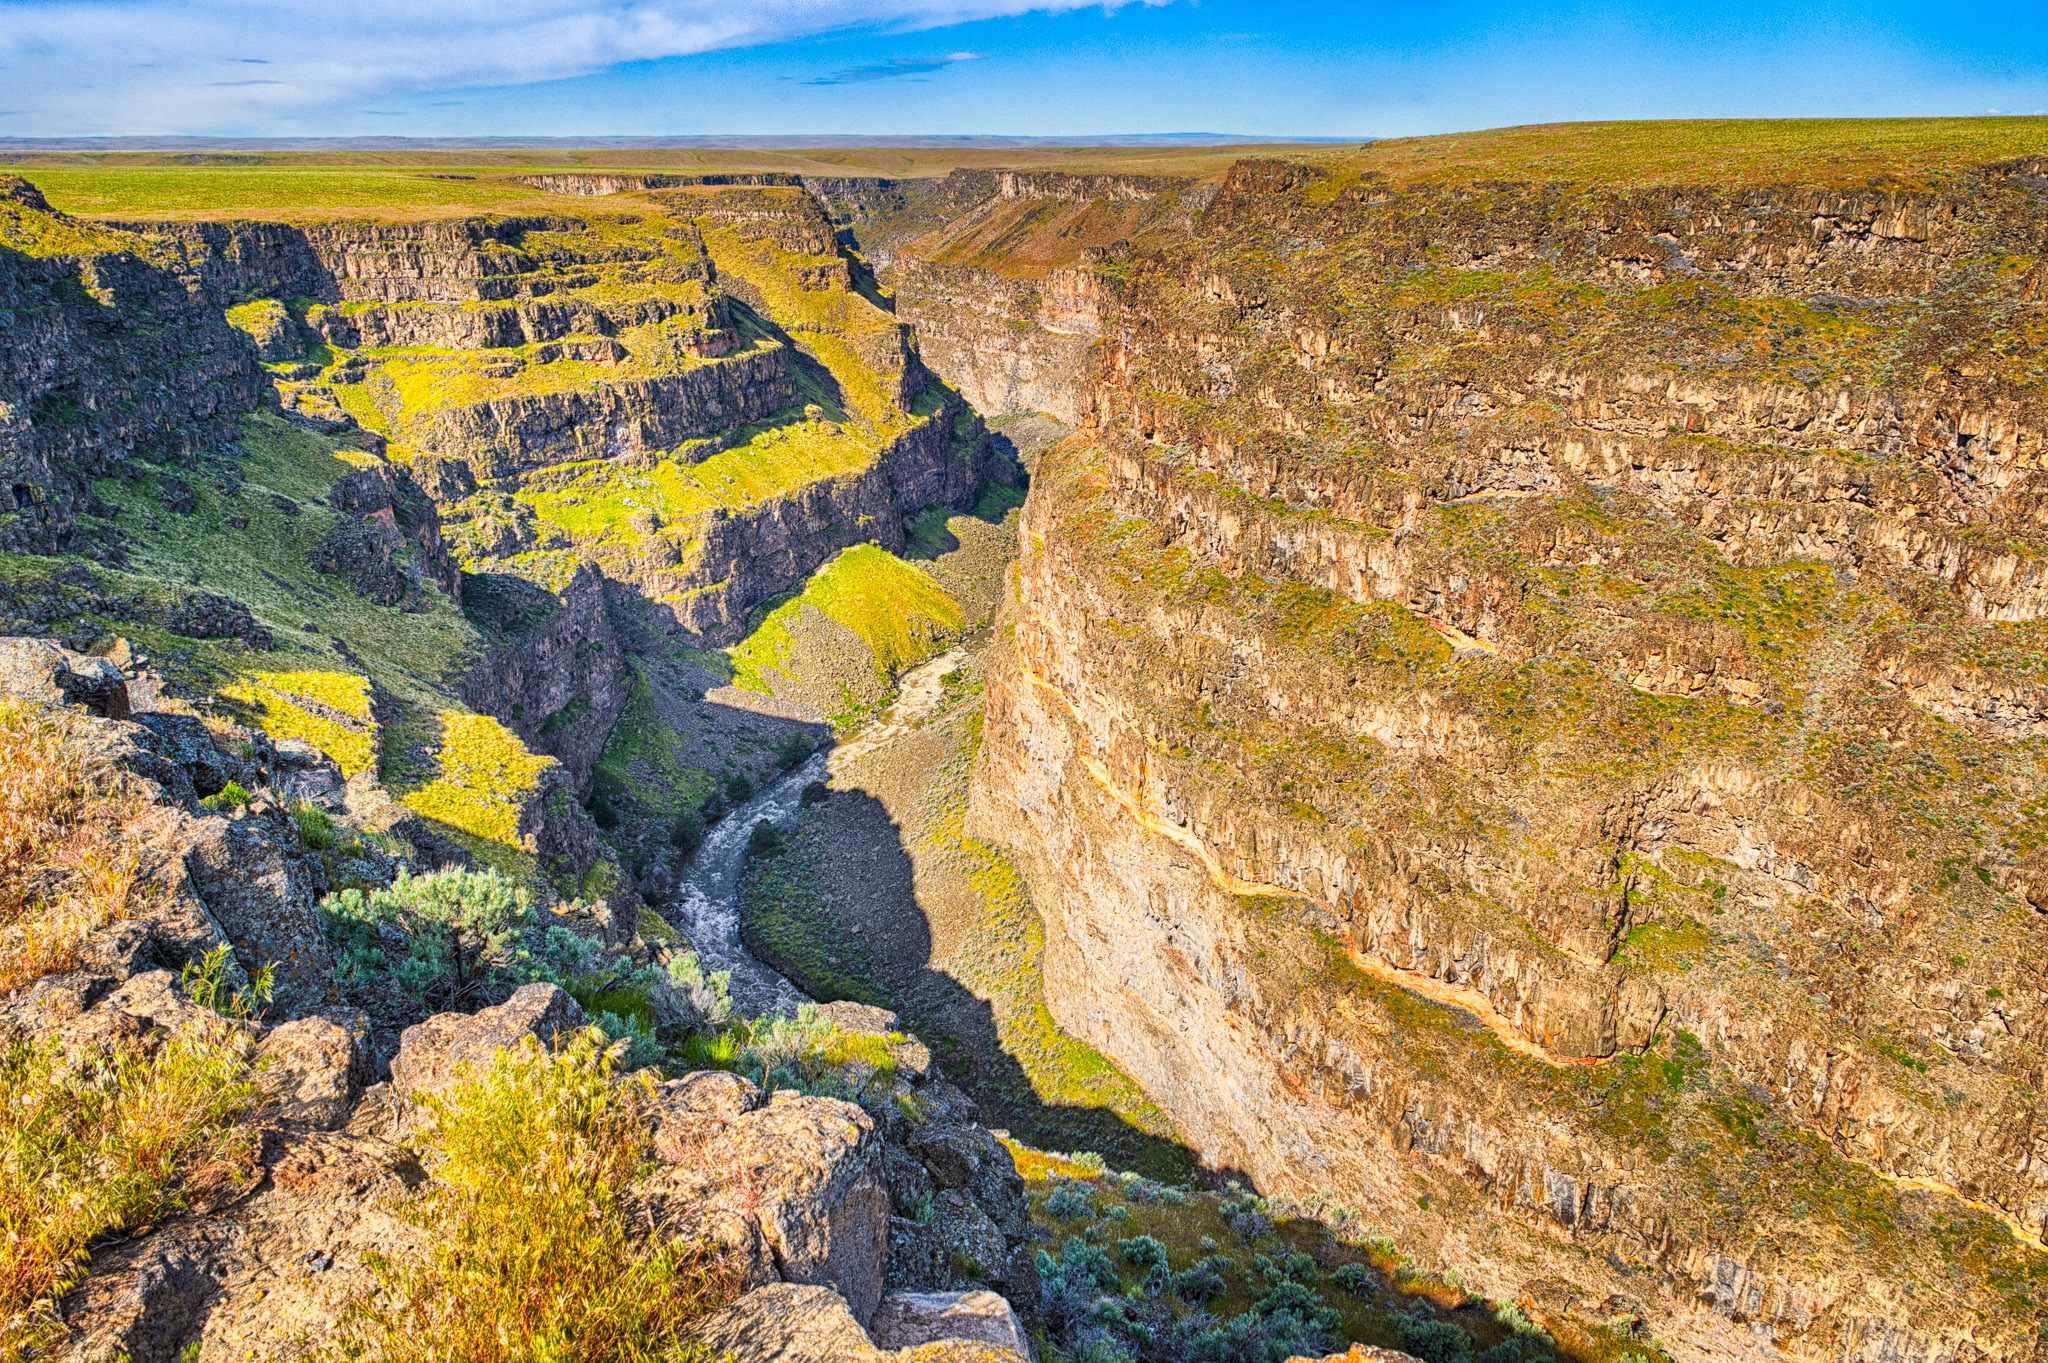 The access road to the Bruneau Canyon Overlook skirts the Saylor Creek Bombing Range. This overlook is one of the only places to get a view of what is called the Grand Canyon of southern Idaho. It is between Twin Falls and Boise.